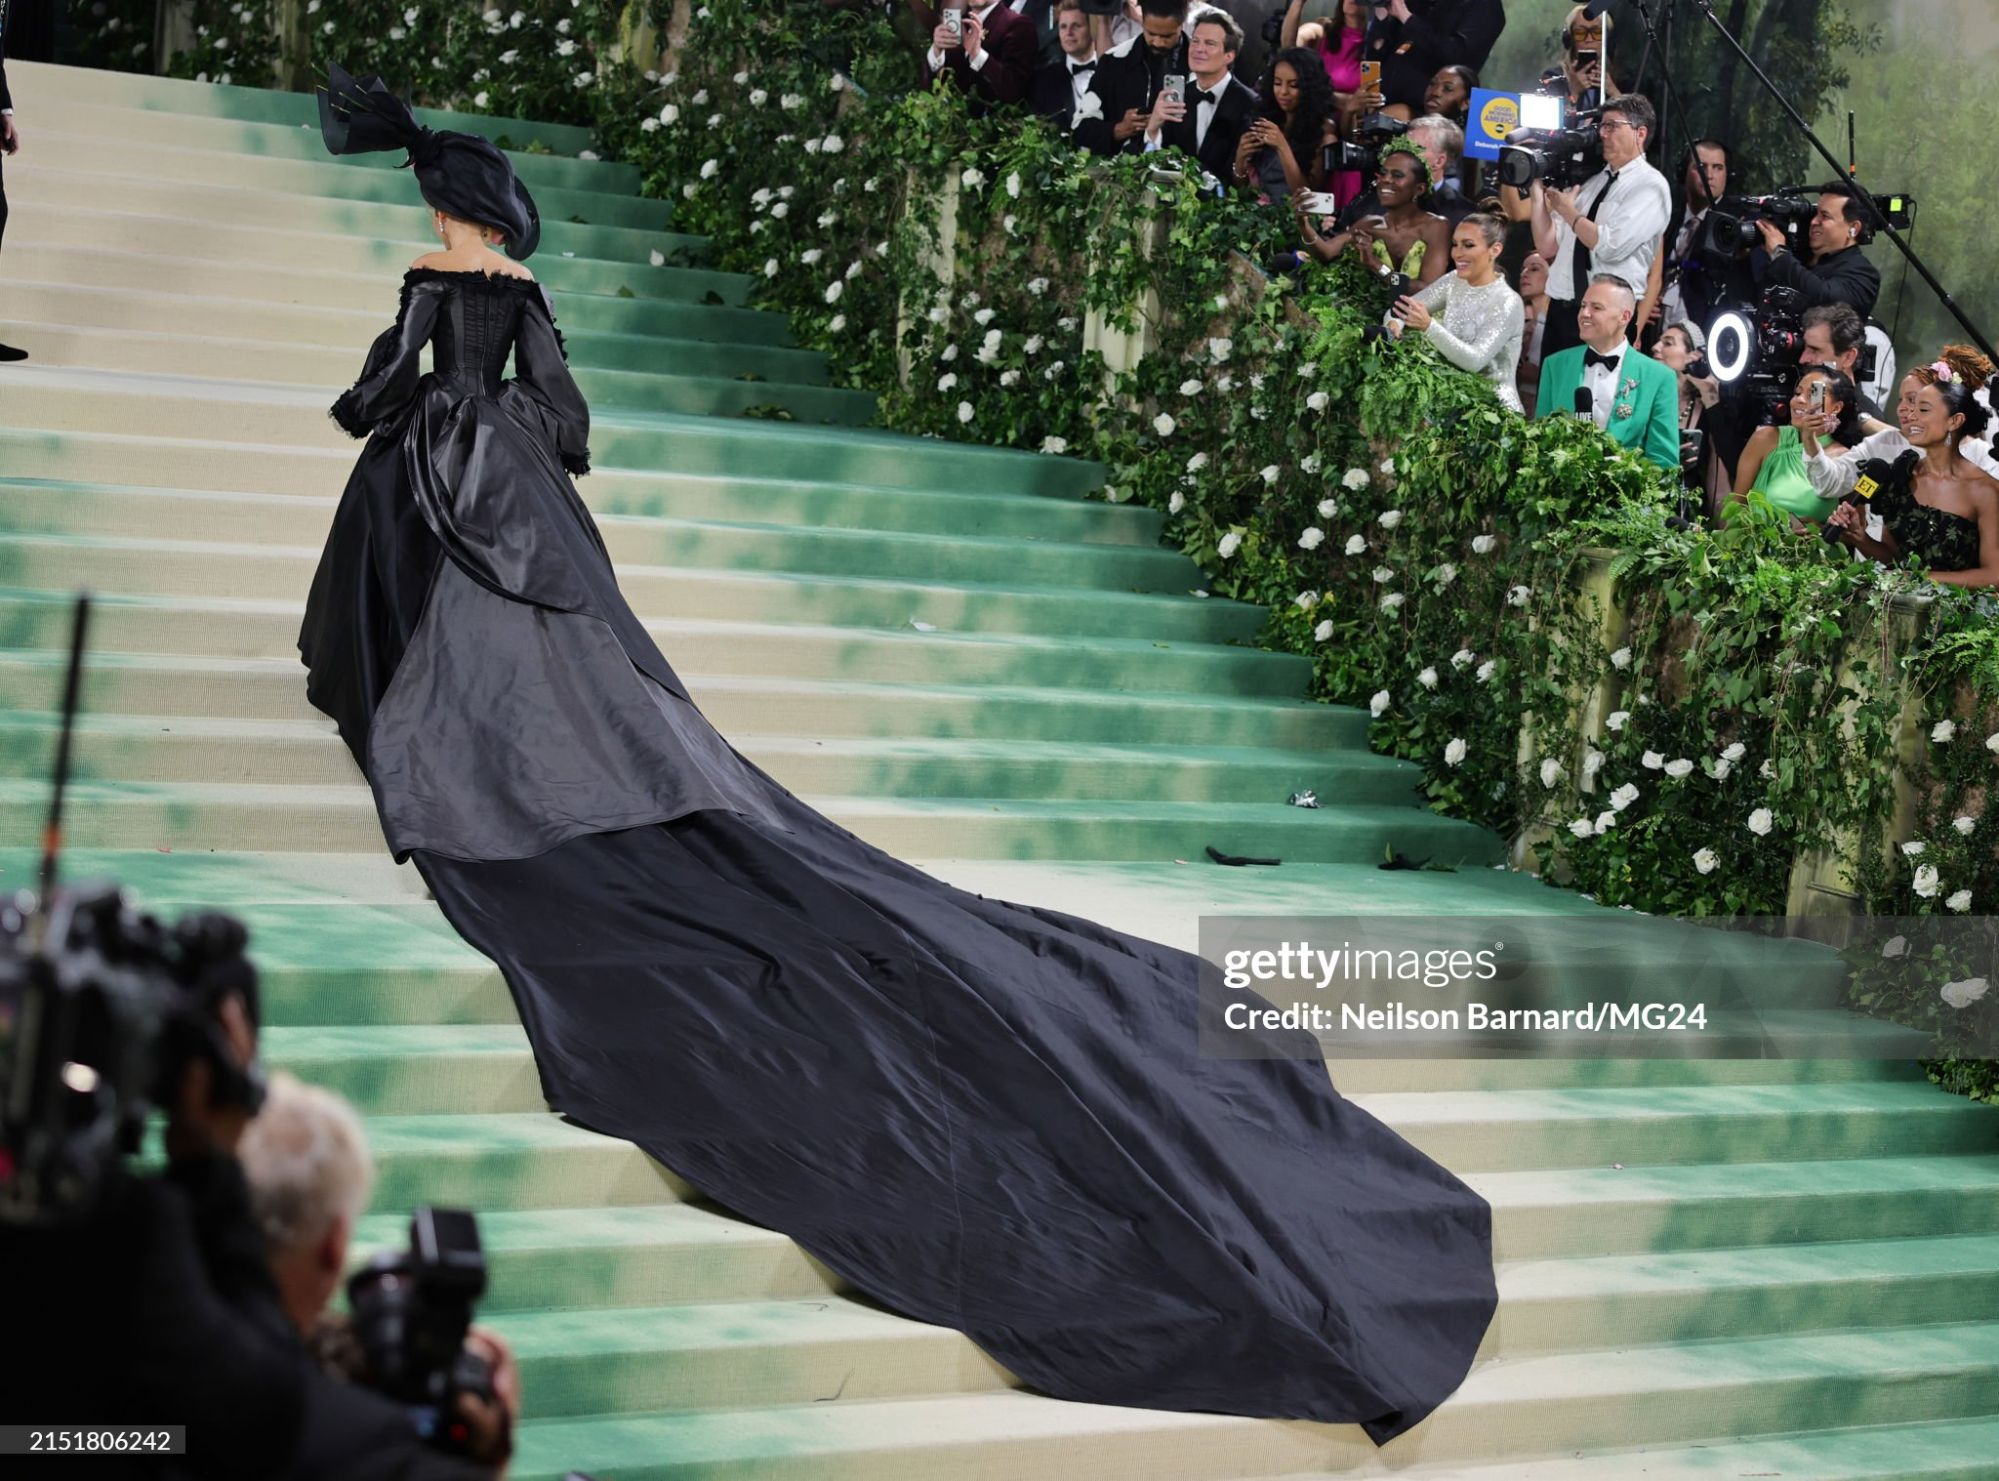 gettyimages-2151806242-2048x2048.jpg